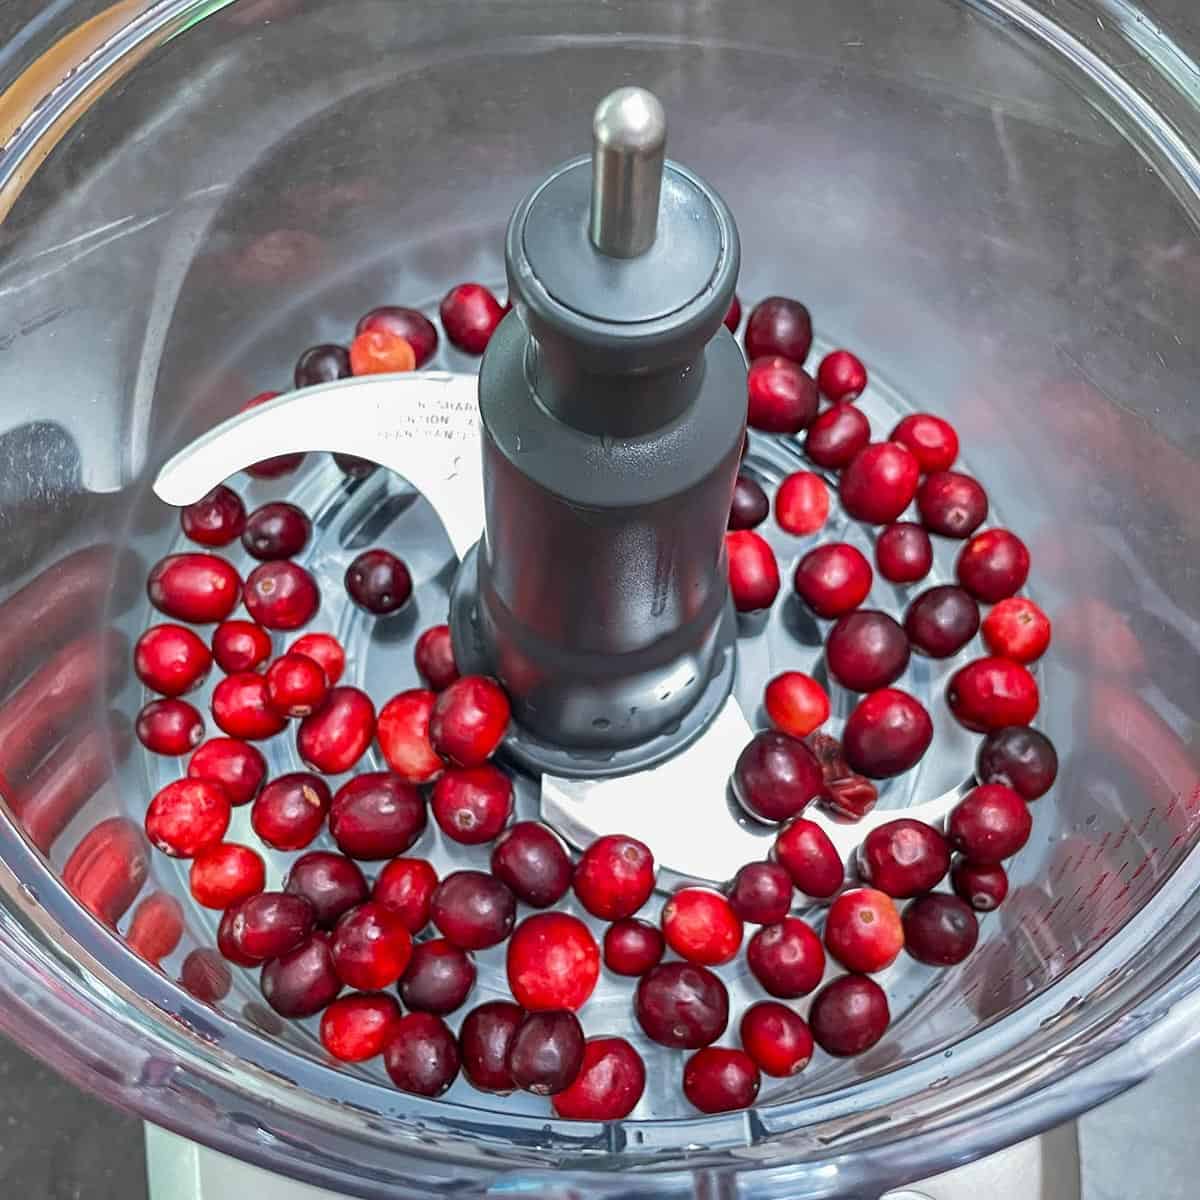 Fresh cranberries in a food processor before being pulsed into pieces.